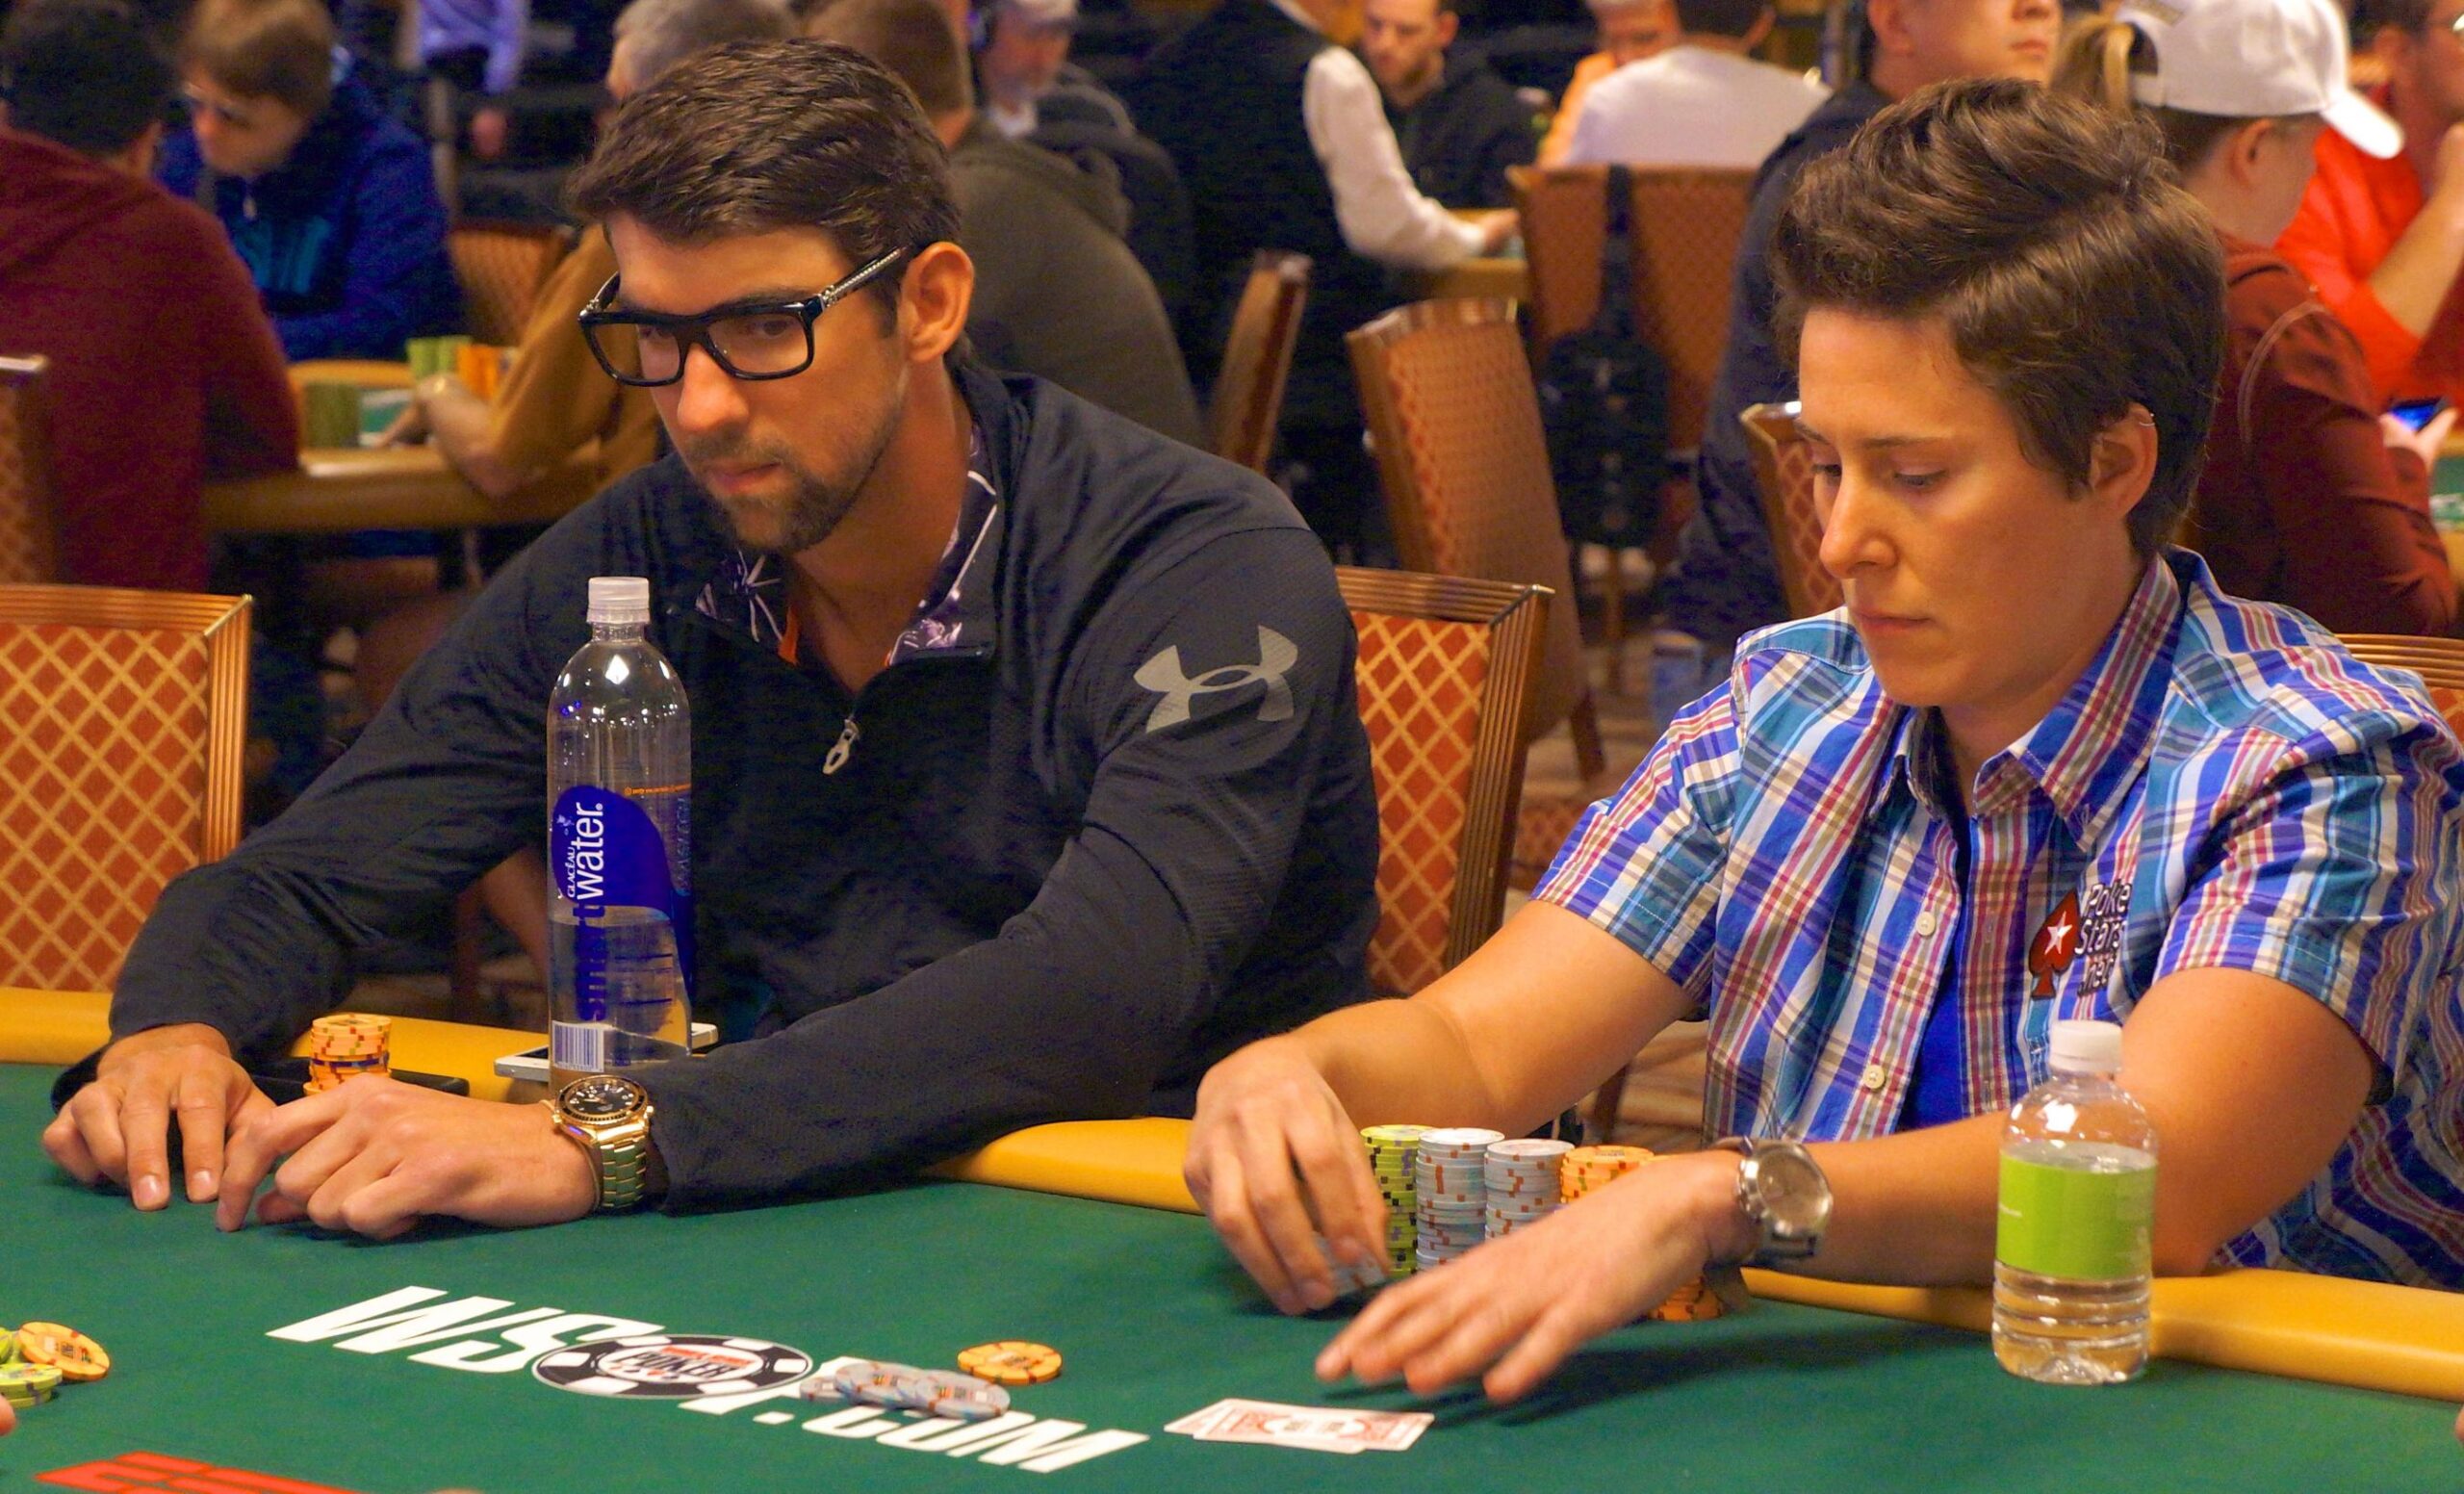 Michael Phelps to Show Off His Poker Skills in Charity Poker Event